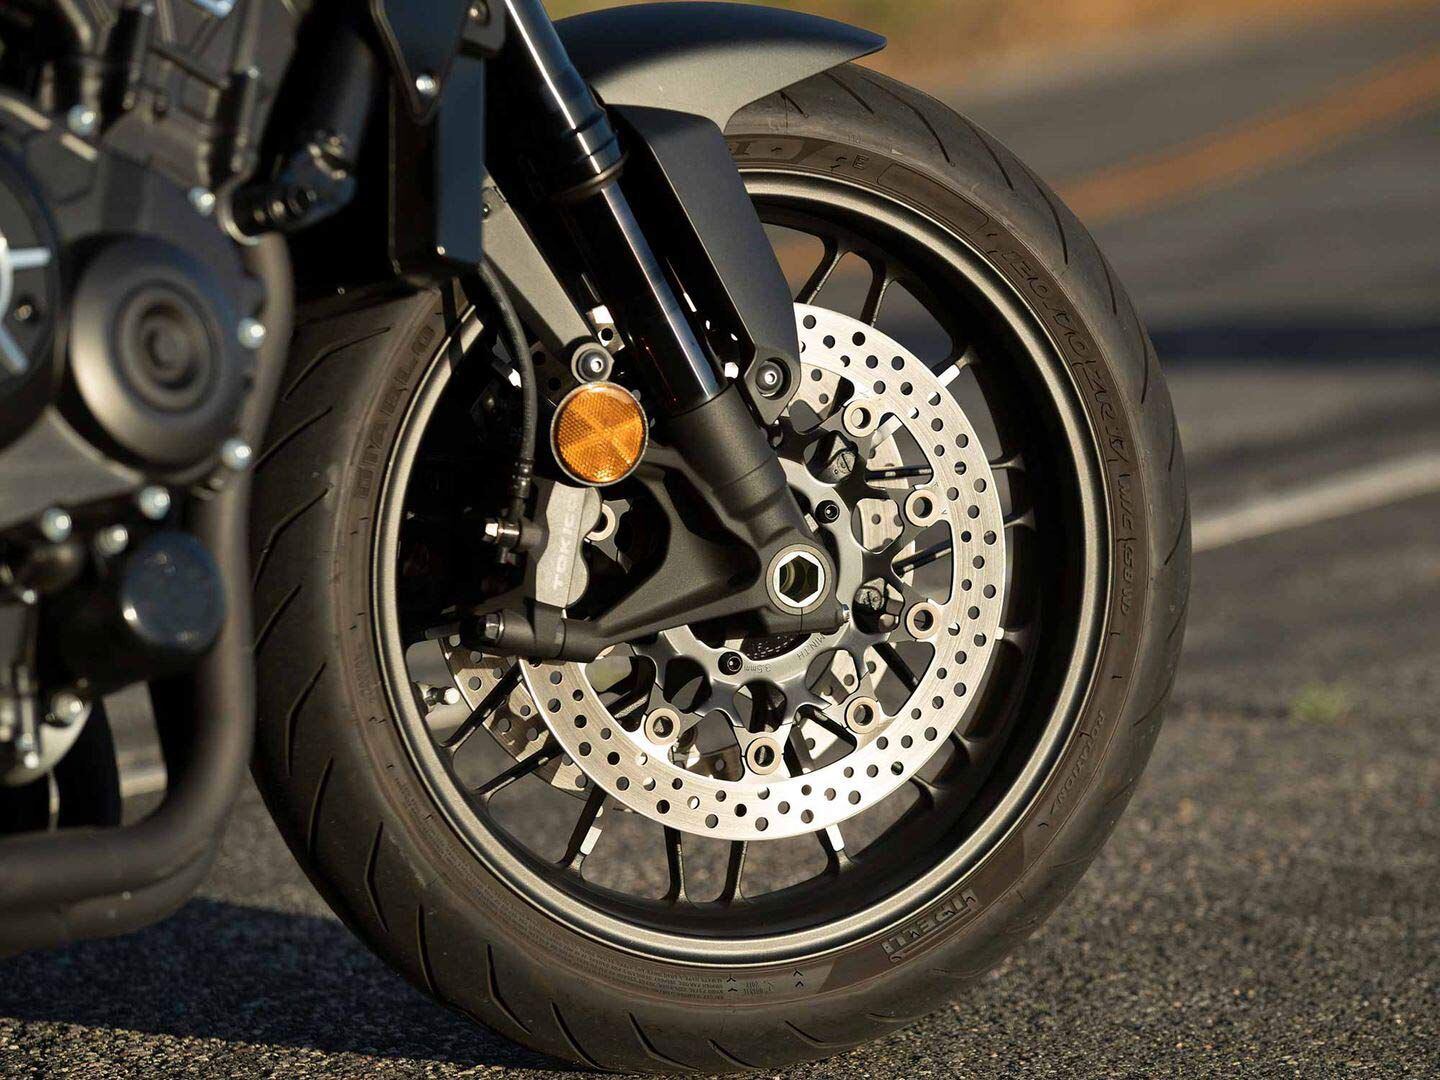 Intricately designed seven-spoke cast aluminum wheels accentuate the rest of the CB1000R’s sleek design. Stopping power from the front brake is impressive, and the ABS works well without being distracting.